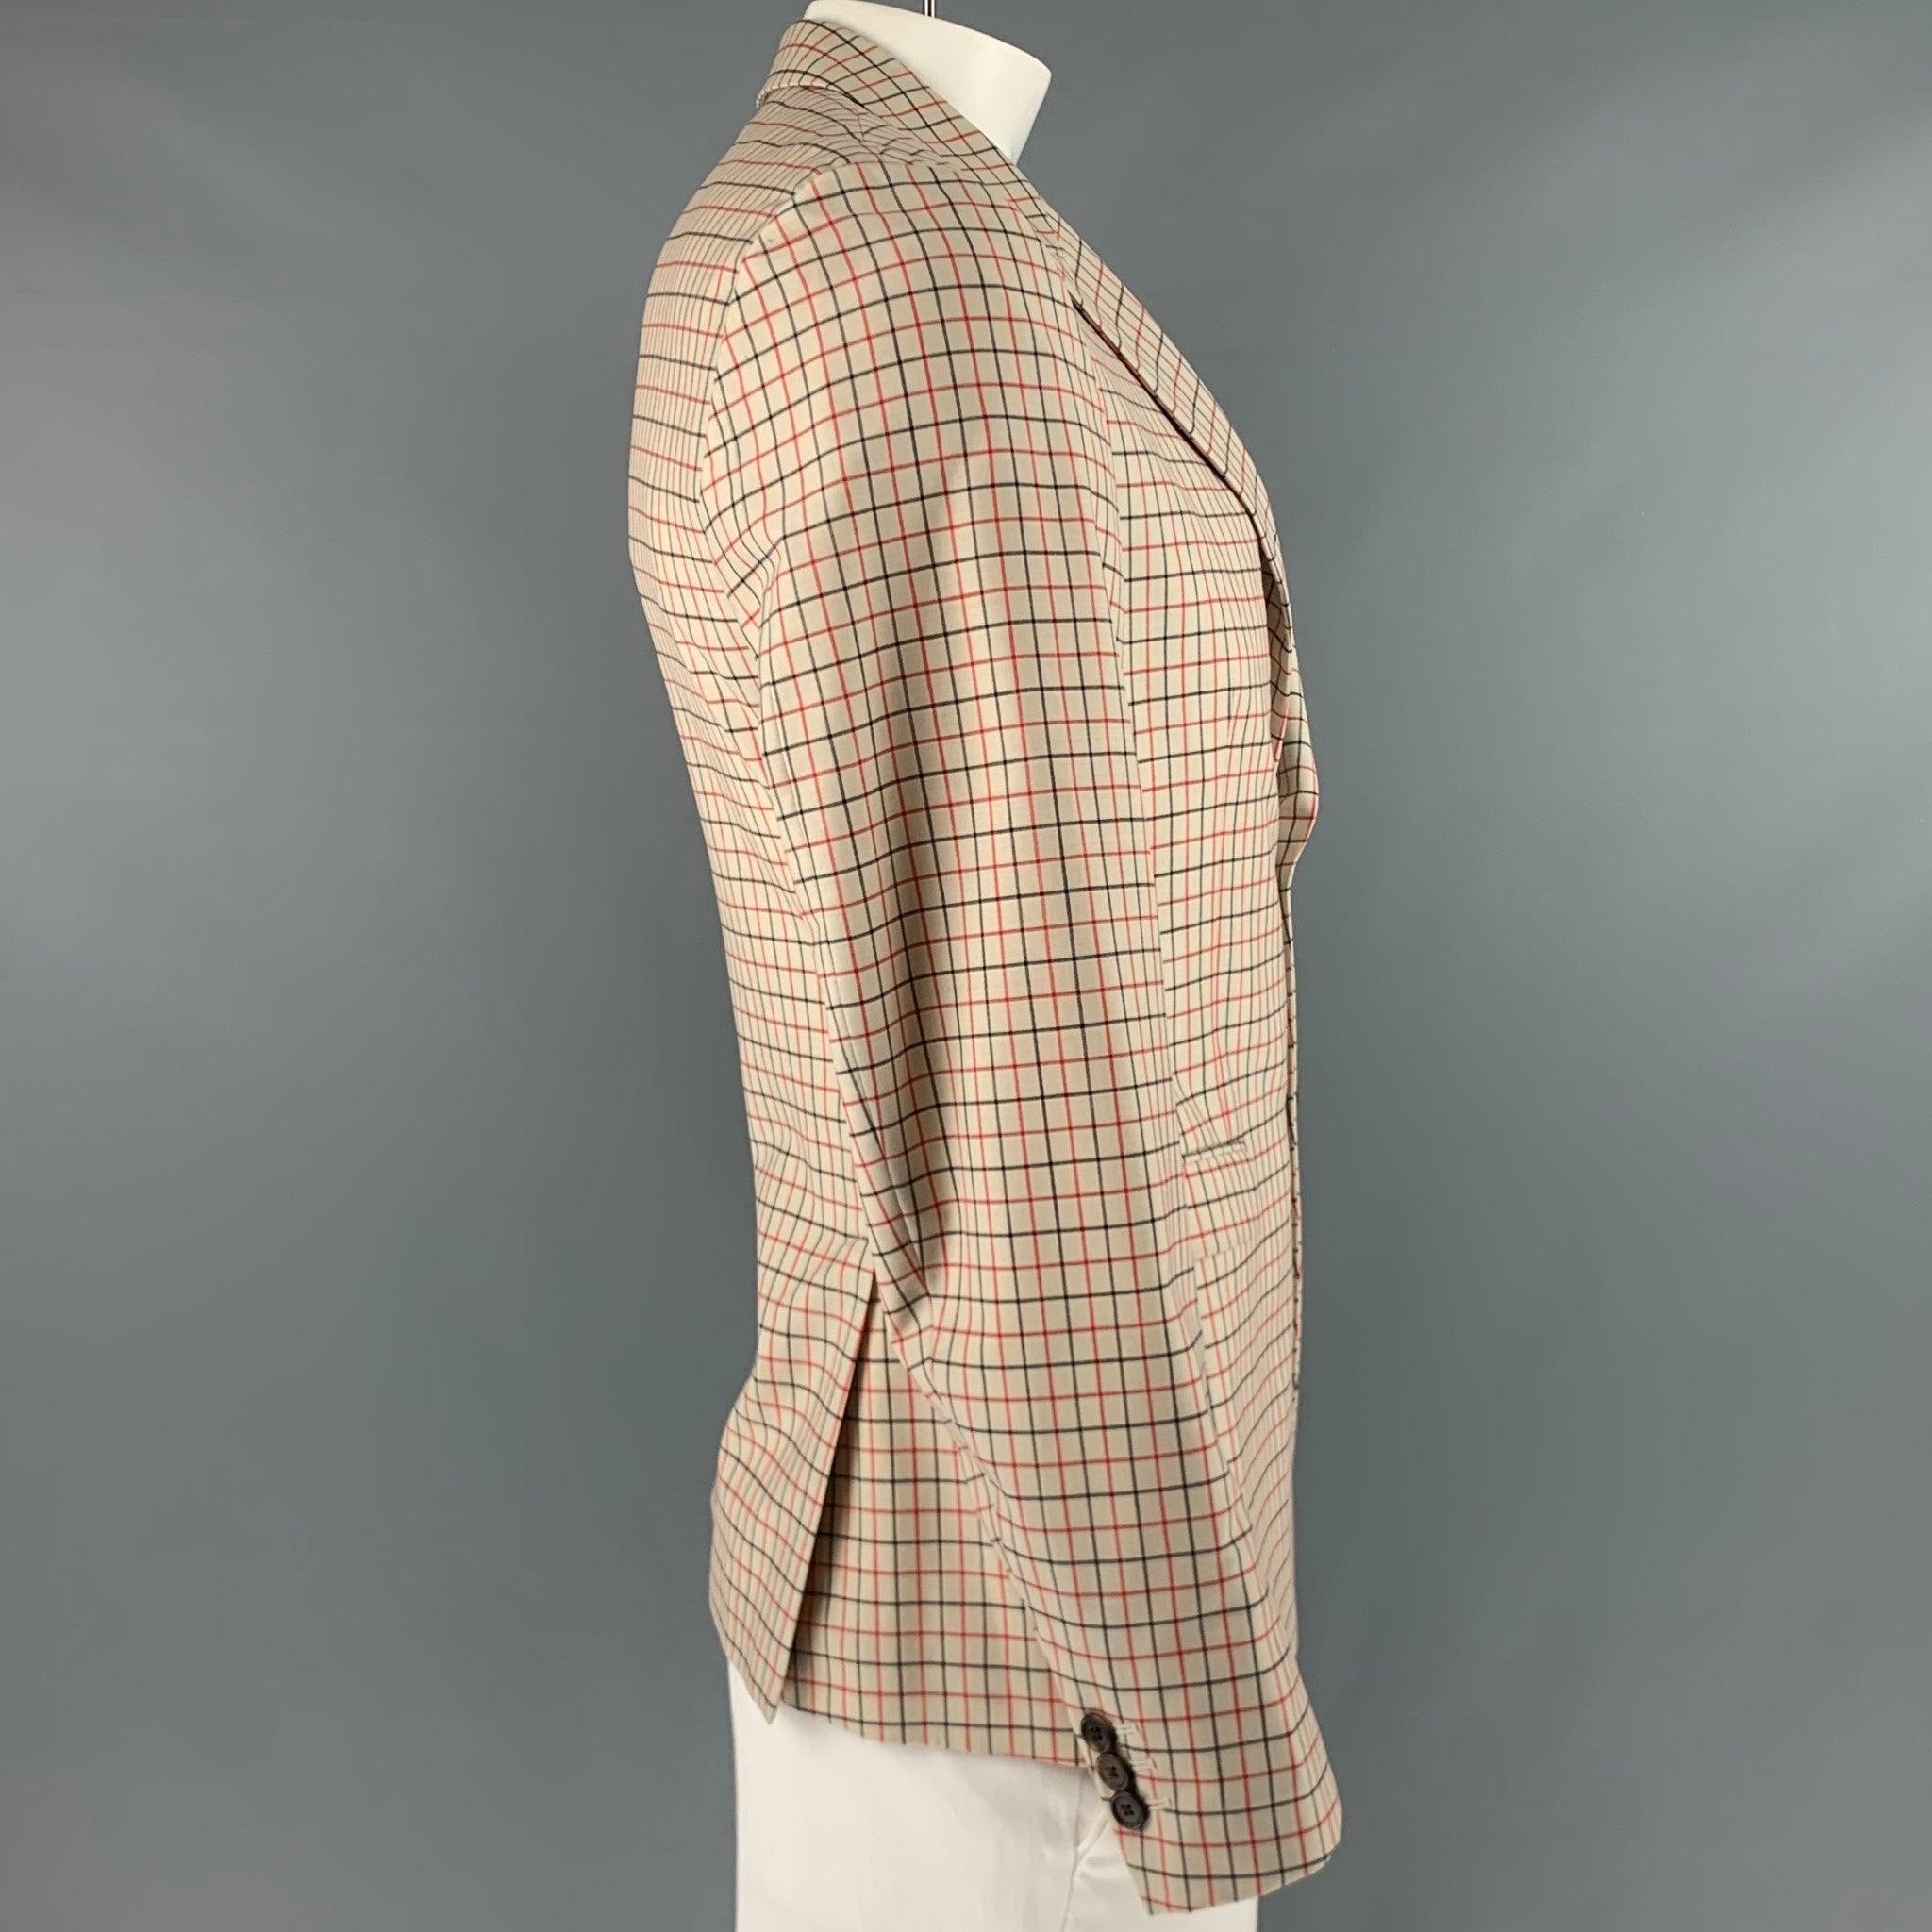 PRADA Size 42 Beige Red Black Window Pane Wool Mohair Sport Coat In Excellent Condition For Sale In San Francisco, CA